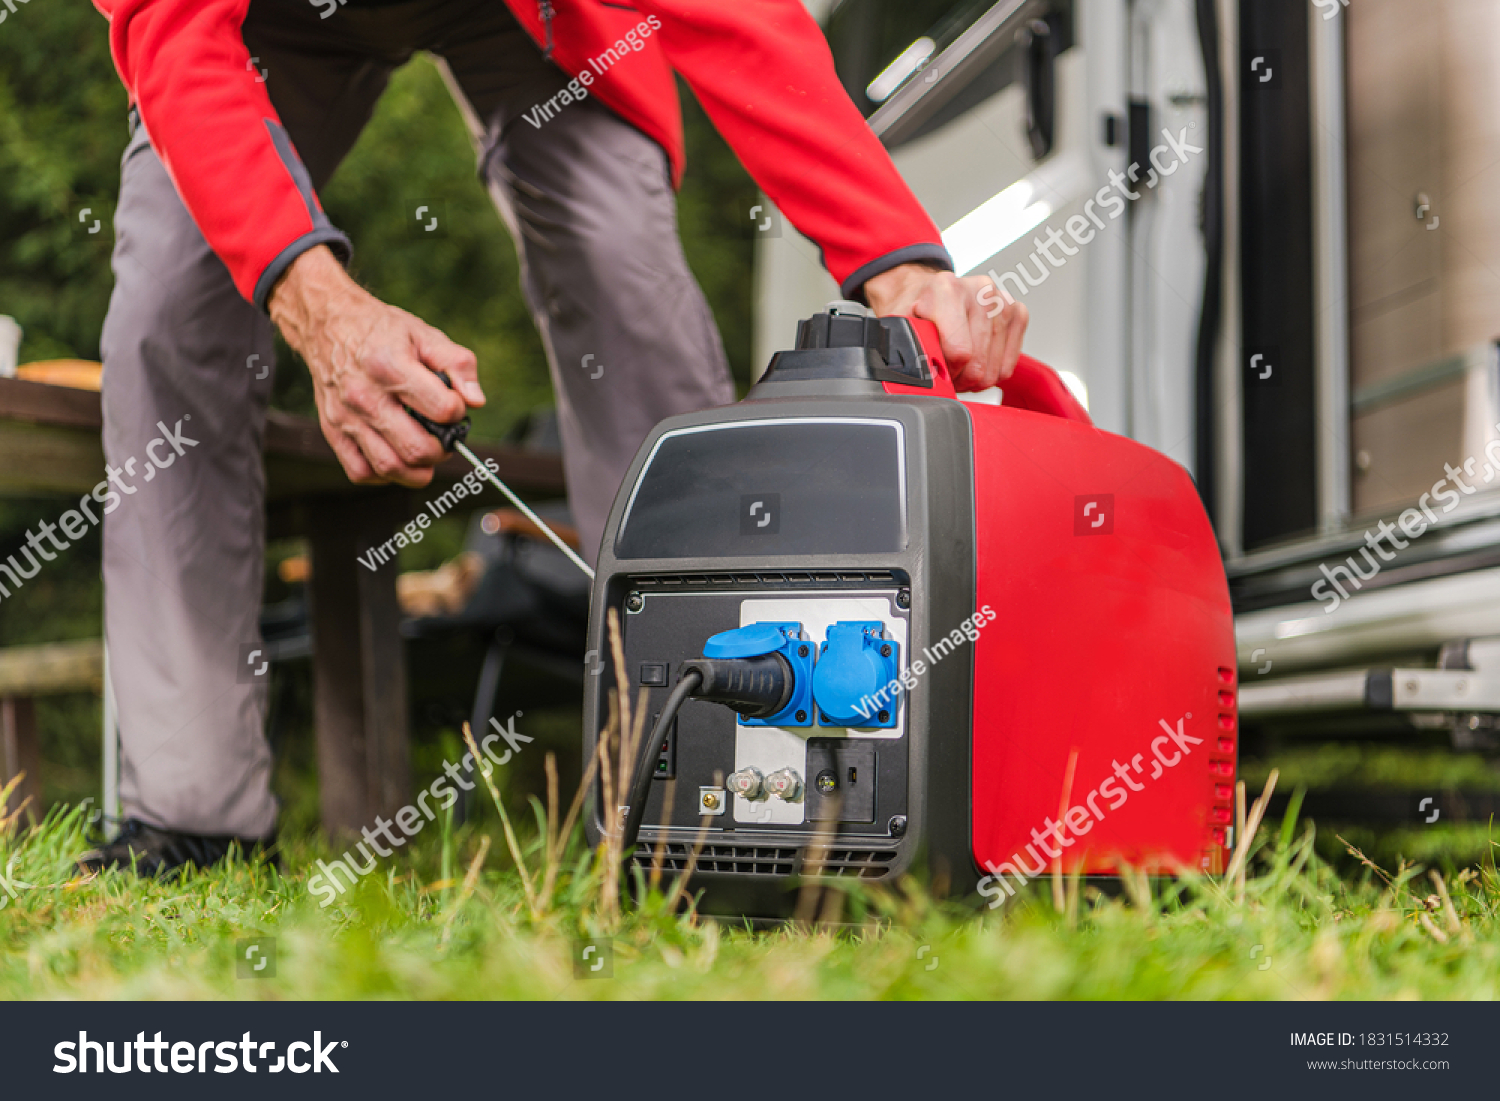 Caucasian Men in His 40s Firing Up Gas Powered Portable Inverter Generator To Connect Electricity To His Camper Van.  #1831514332